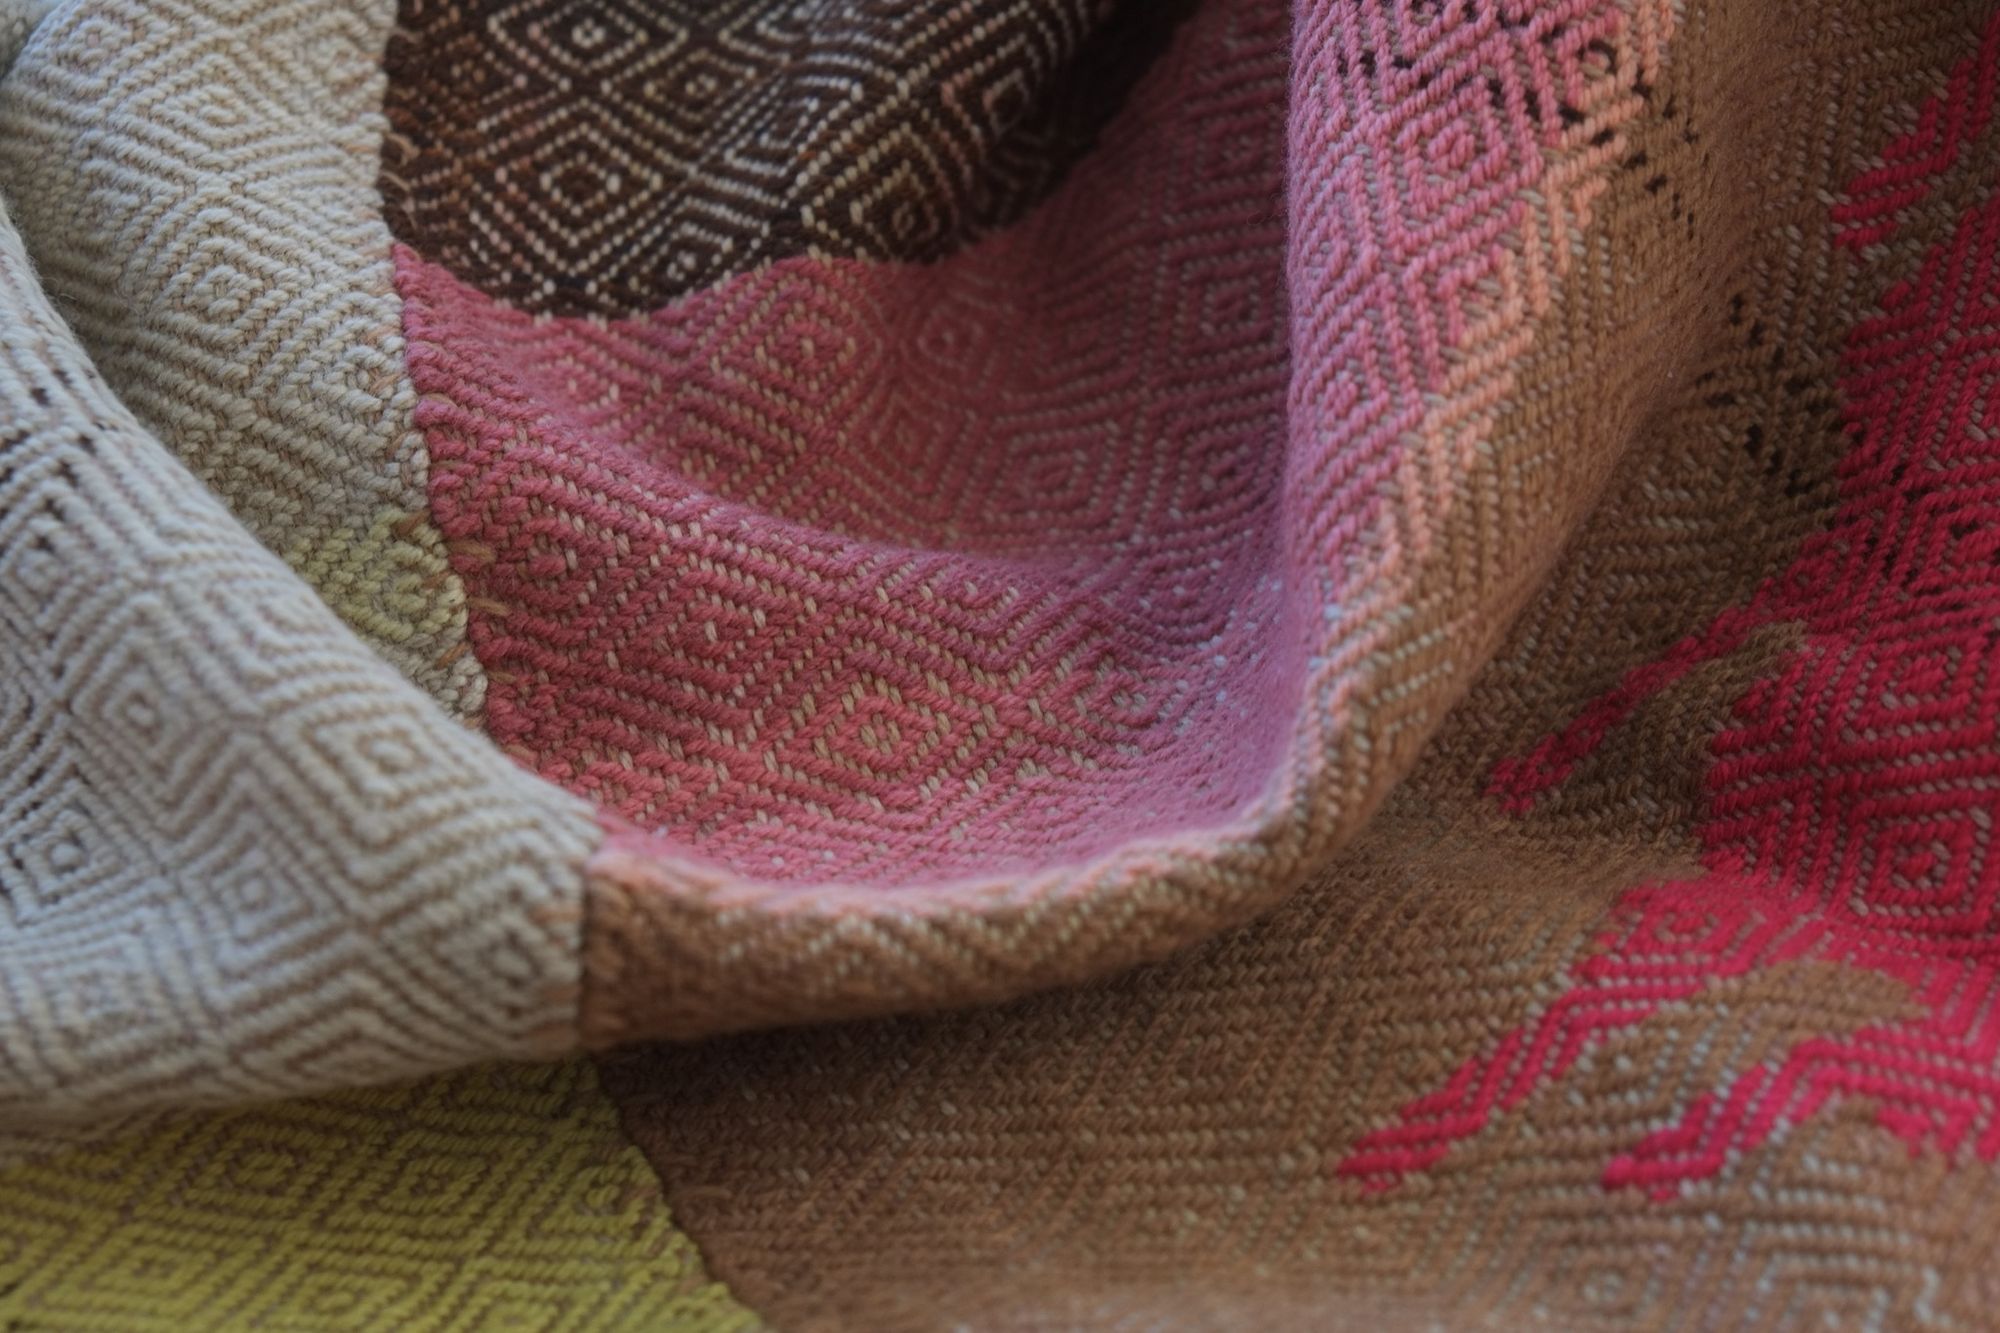 Details of a brown, pink, yellow, blue, green, tan and purple woolen blanket with a diamond pattern.